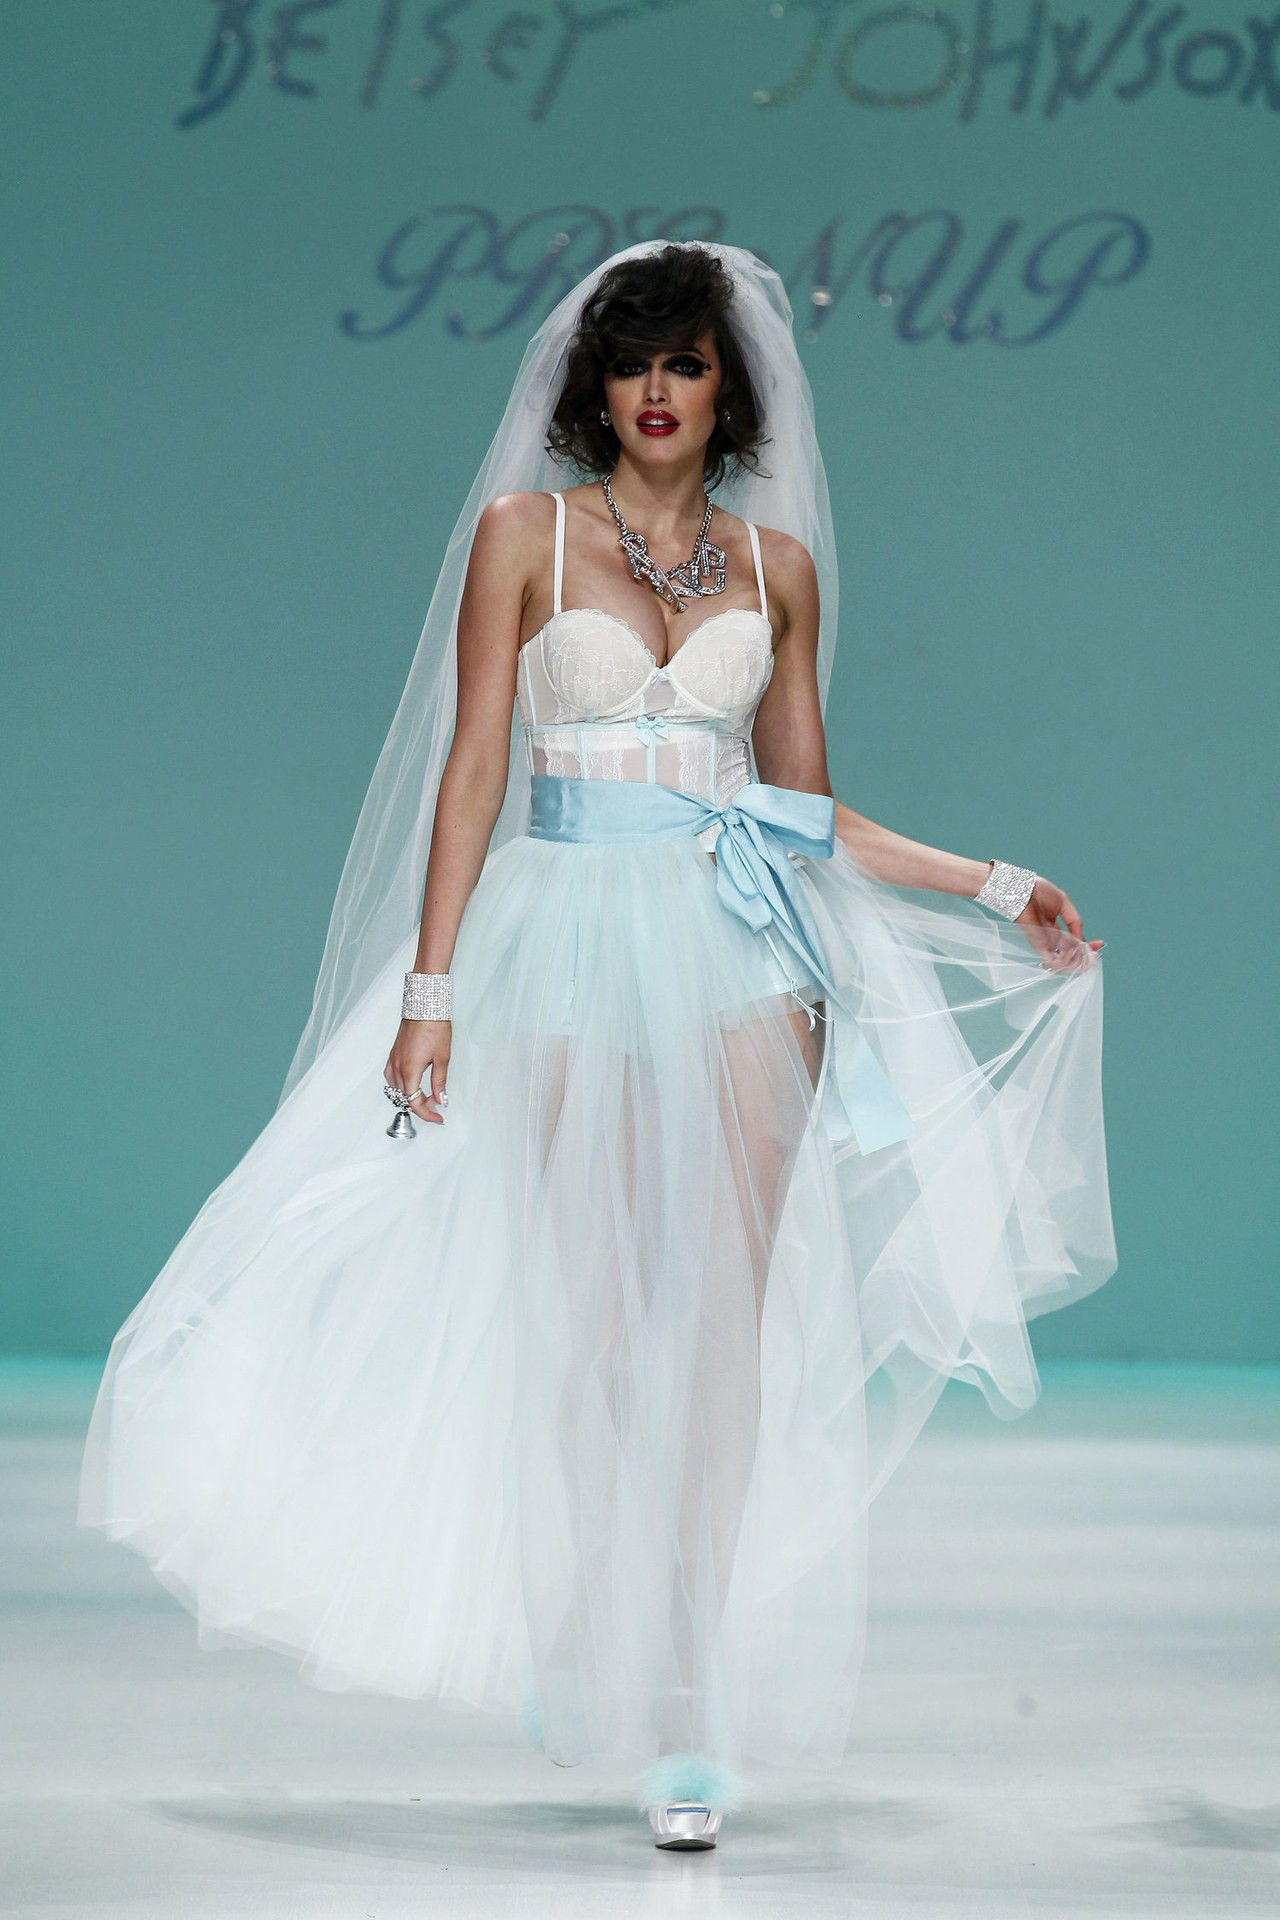 Betsey Johnson Wedding Gowns
 Betsey Johnson Real Housewives Runway Wedding Dresses by